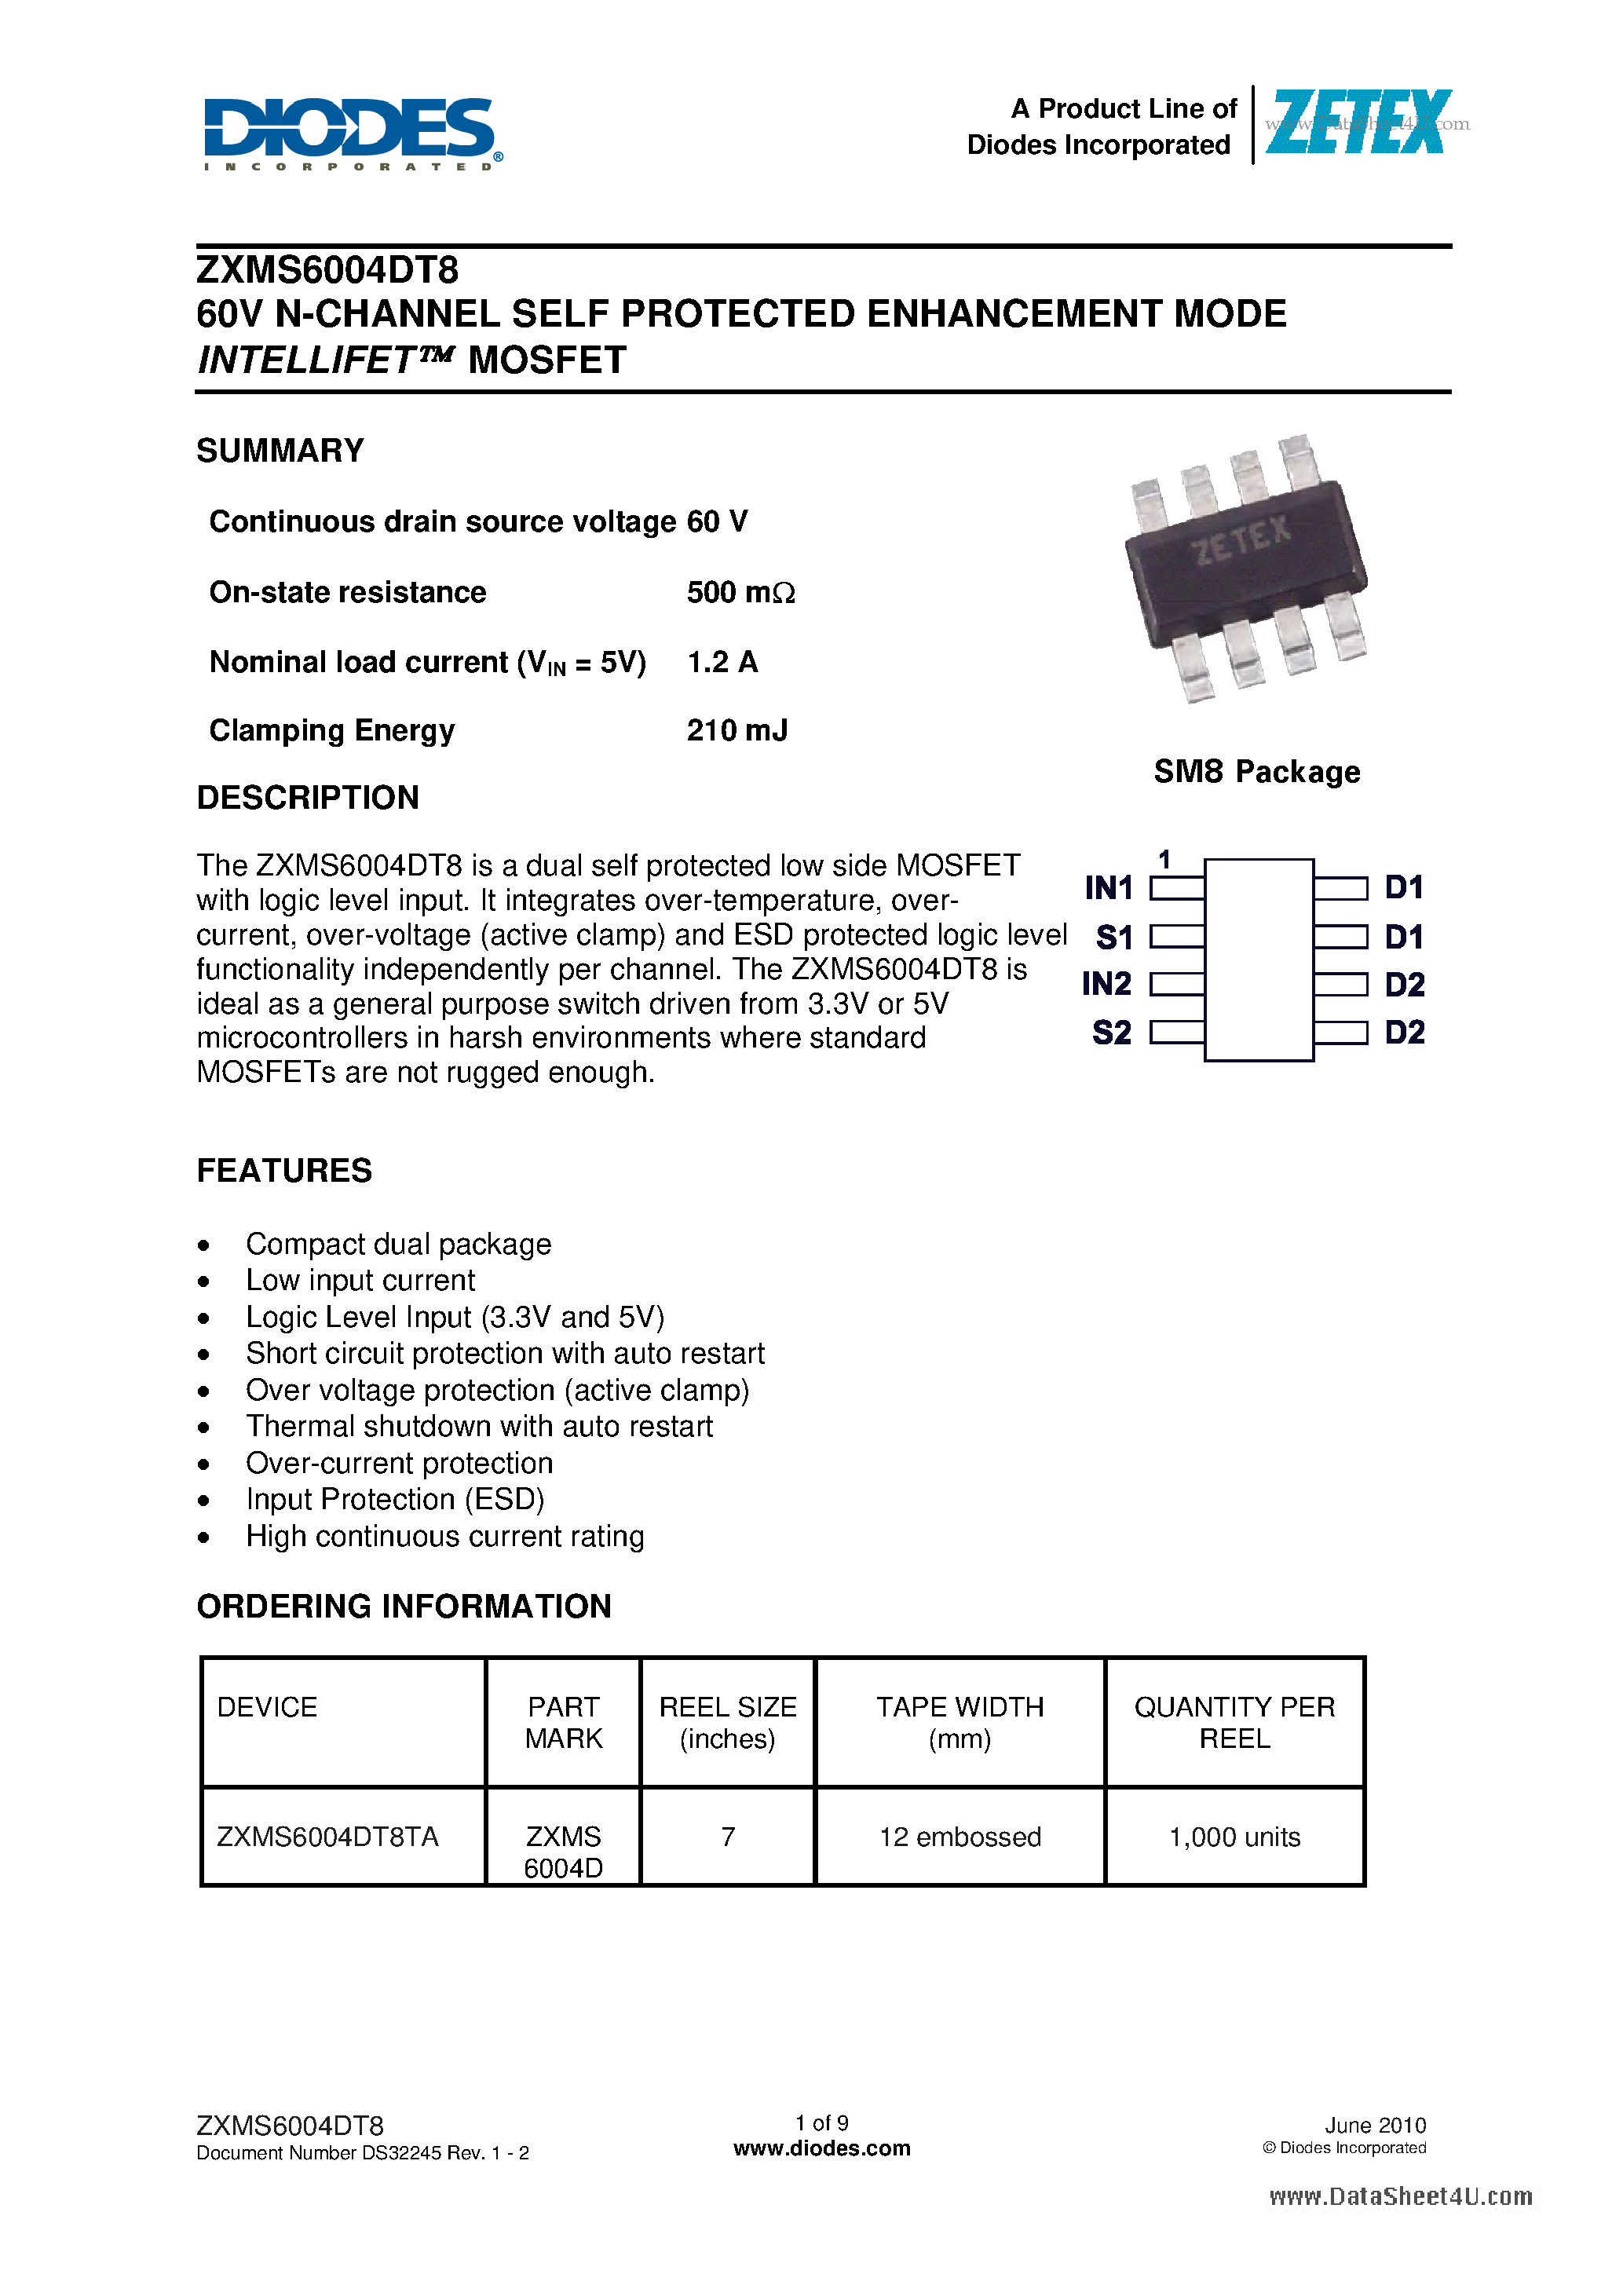 Datasheet ZXMS6004DT8 - 60V N-CHANNEL SELF PROTECTED ENHANCEMENT MODE INTELLIFET MOSFET page 1